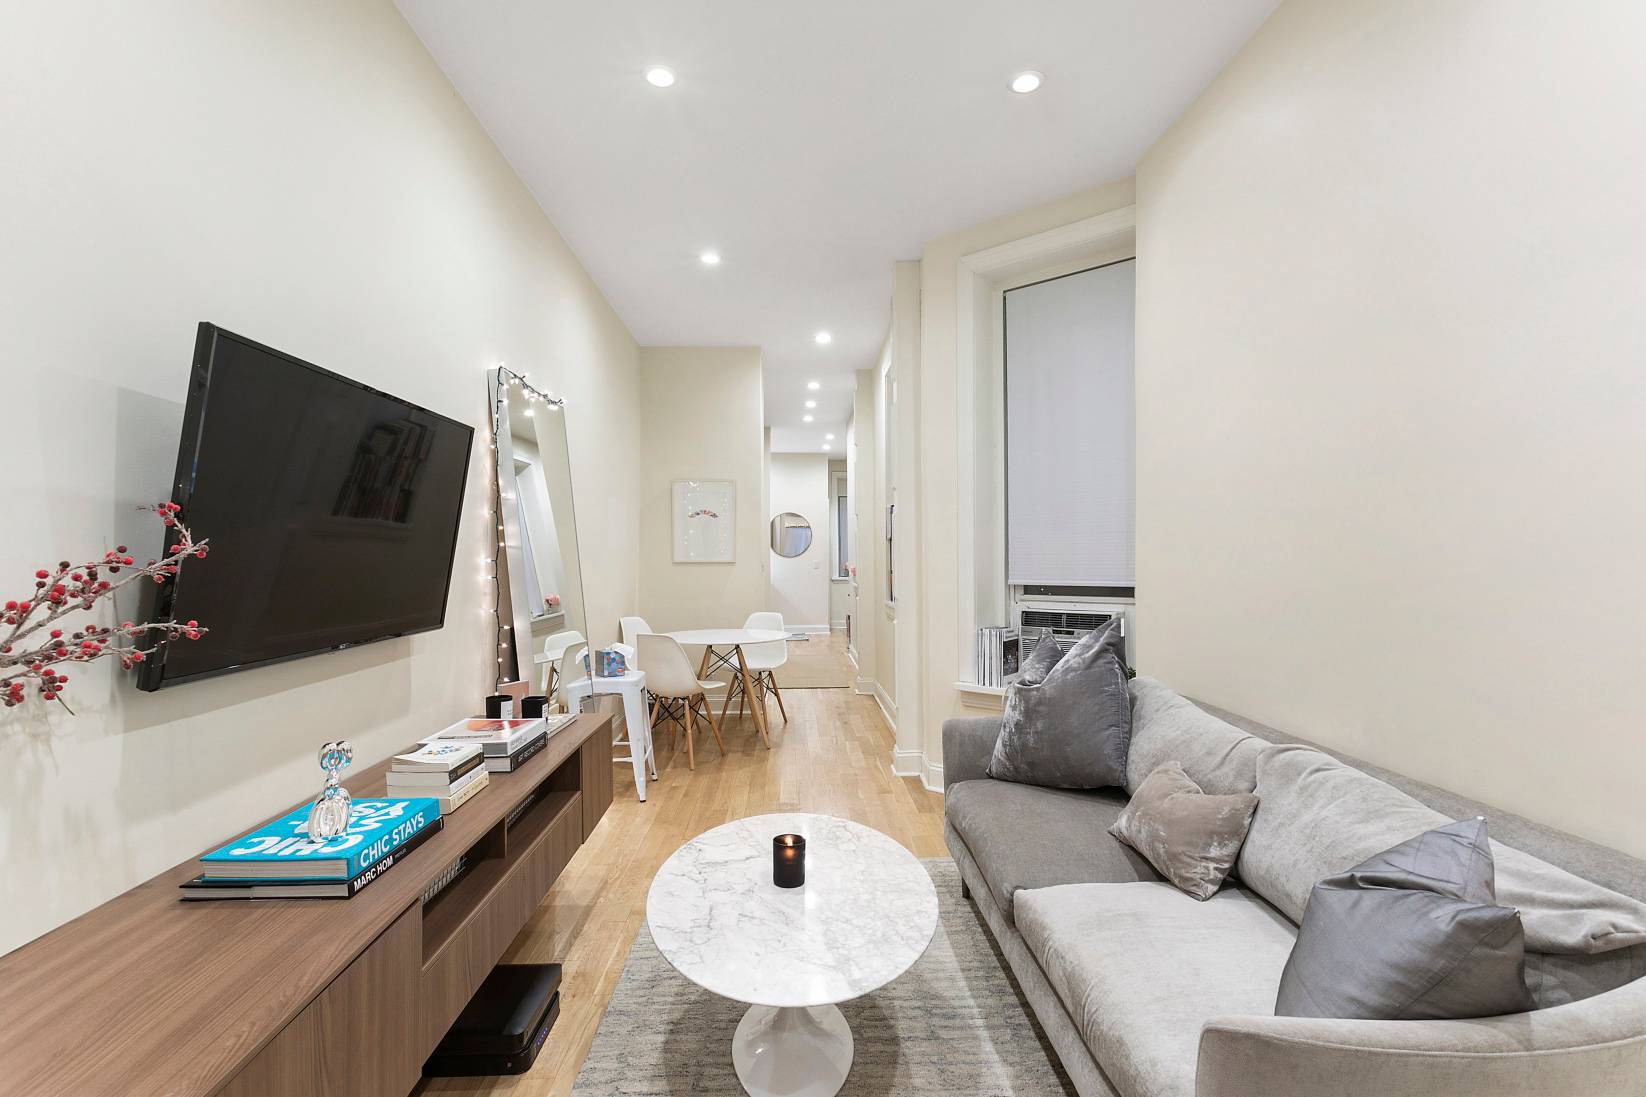 Just Listed ! Welcome home to this beautifully renovated, Mint Condition 1BR, located in a charming brownstone co op on a coveted block of the Gold Coast.